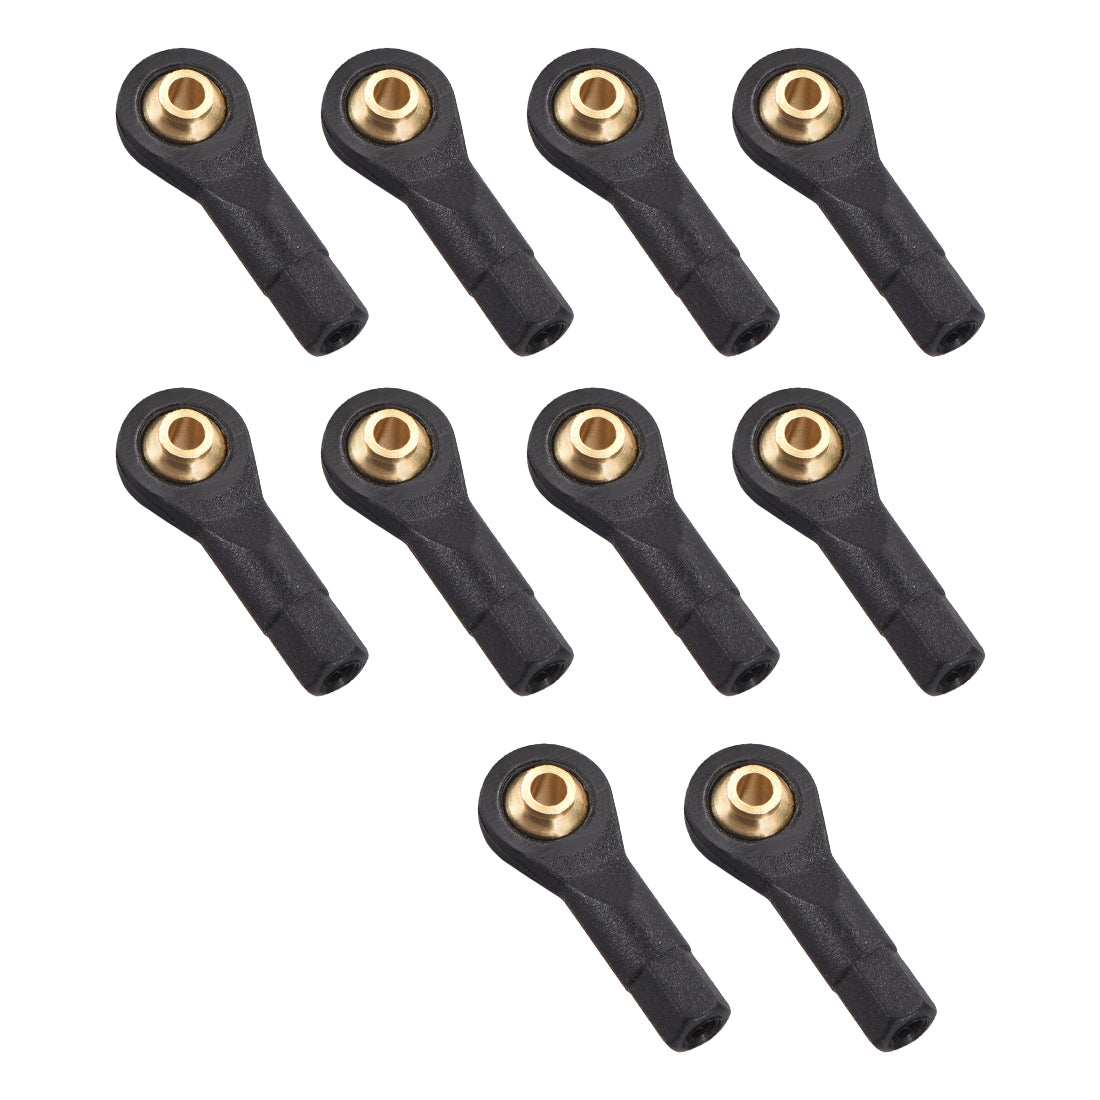 uxcell Uxcell 10 Pcs M2 2.0xL19mm Lever Steering Linkage Tie Rod End Ball Head End without Screws and Nut for RC Robot